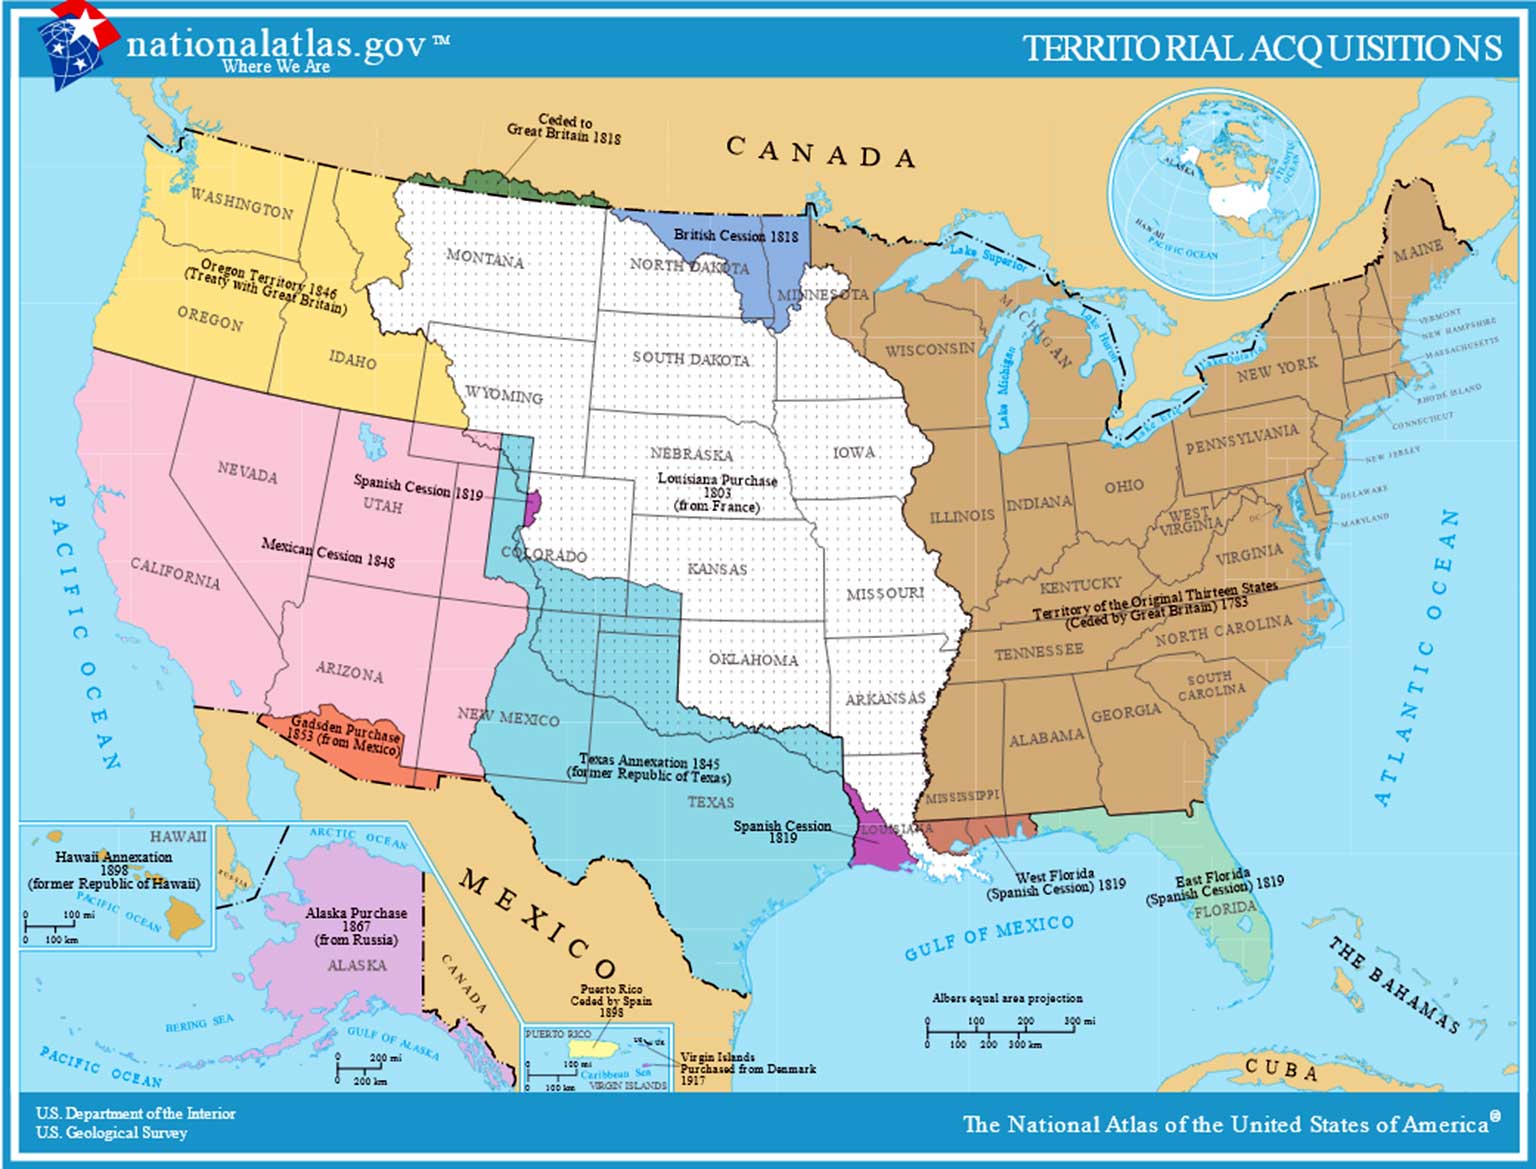 The U.S. land acquisition from France in 1803, known as the Louisiana Purchase